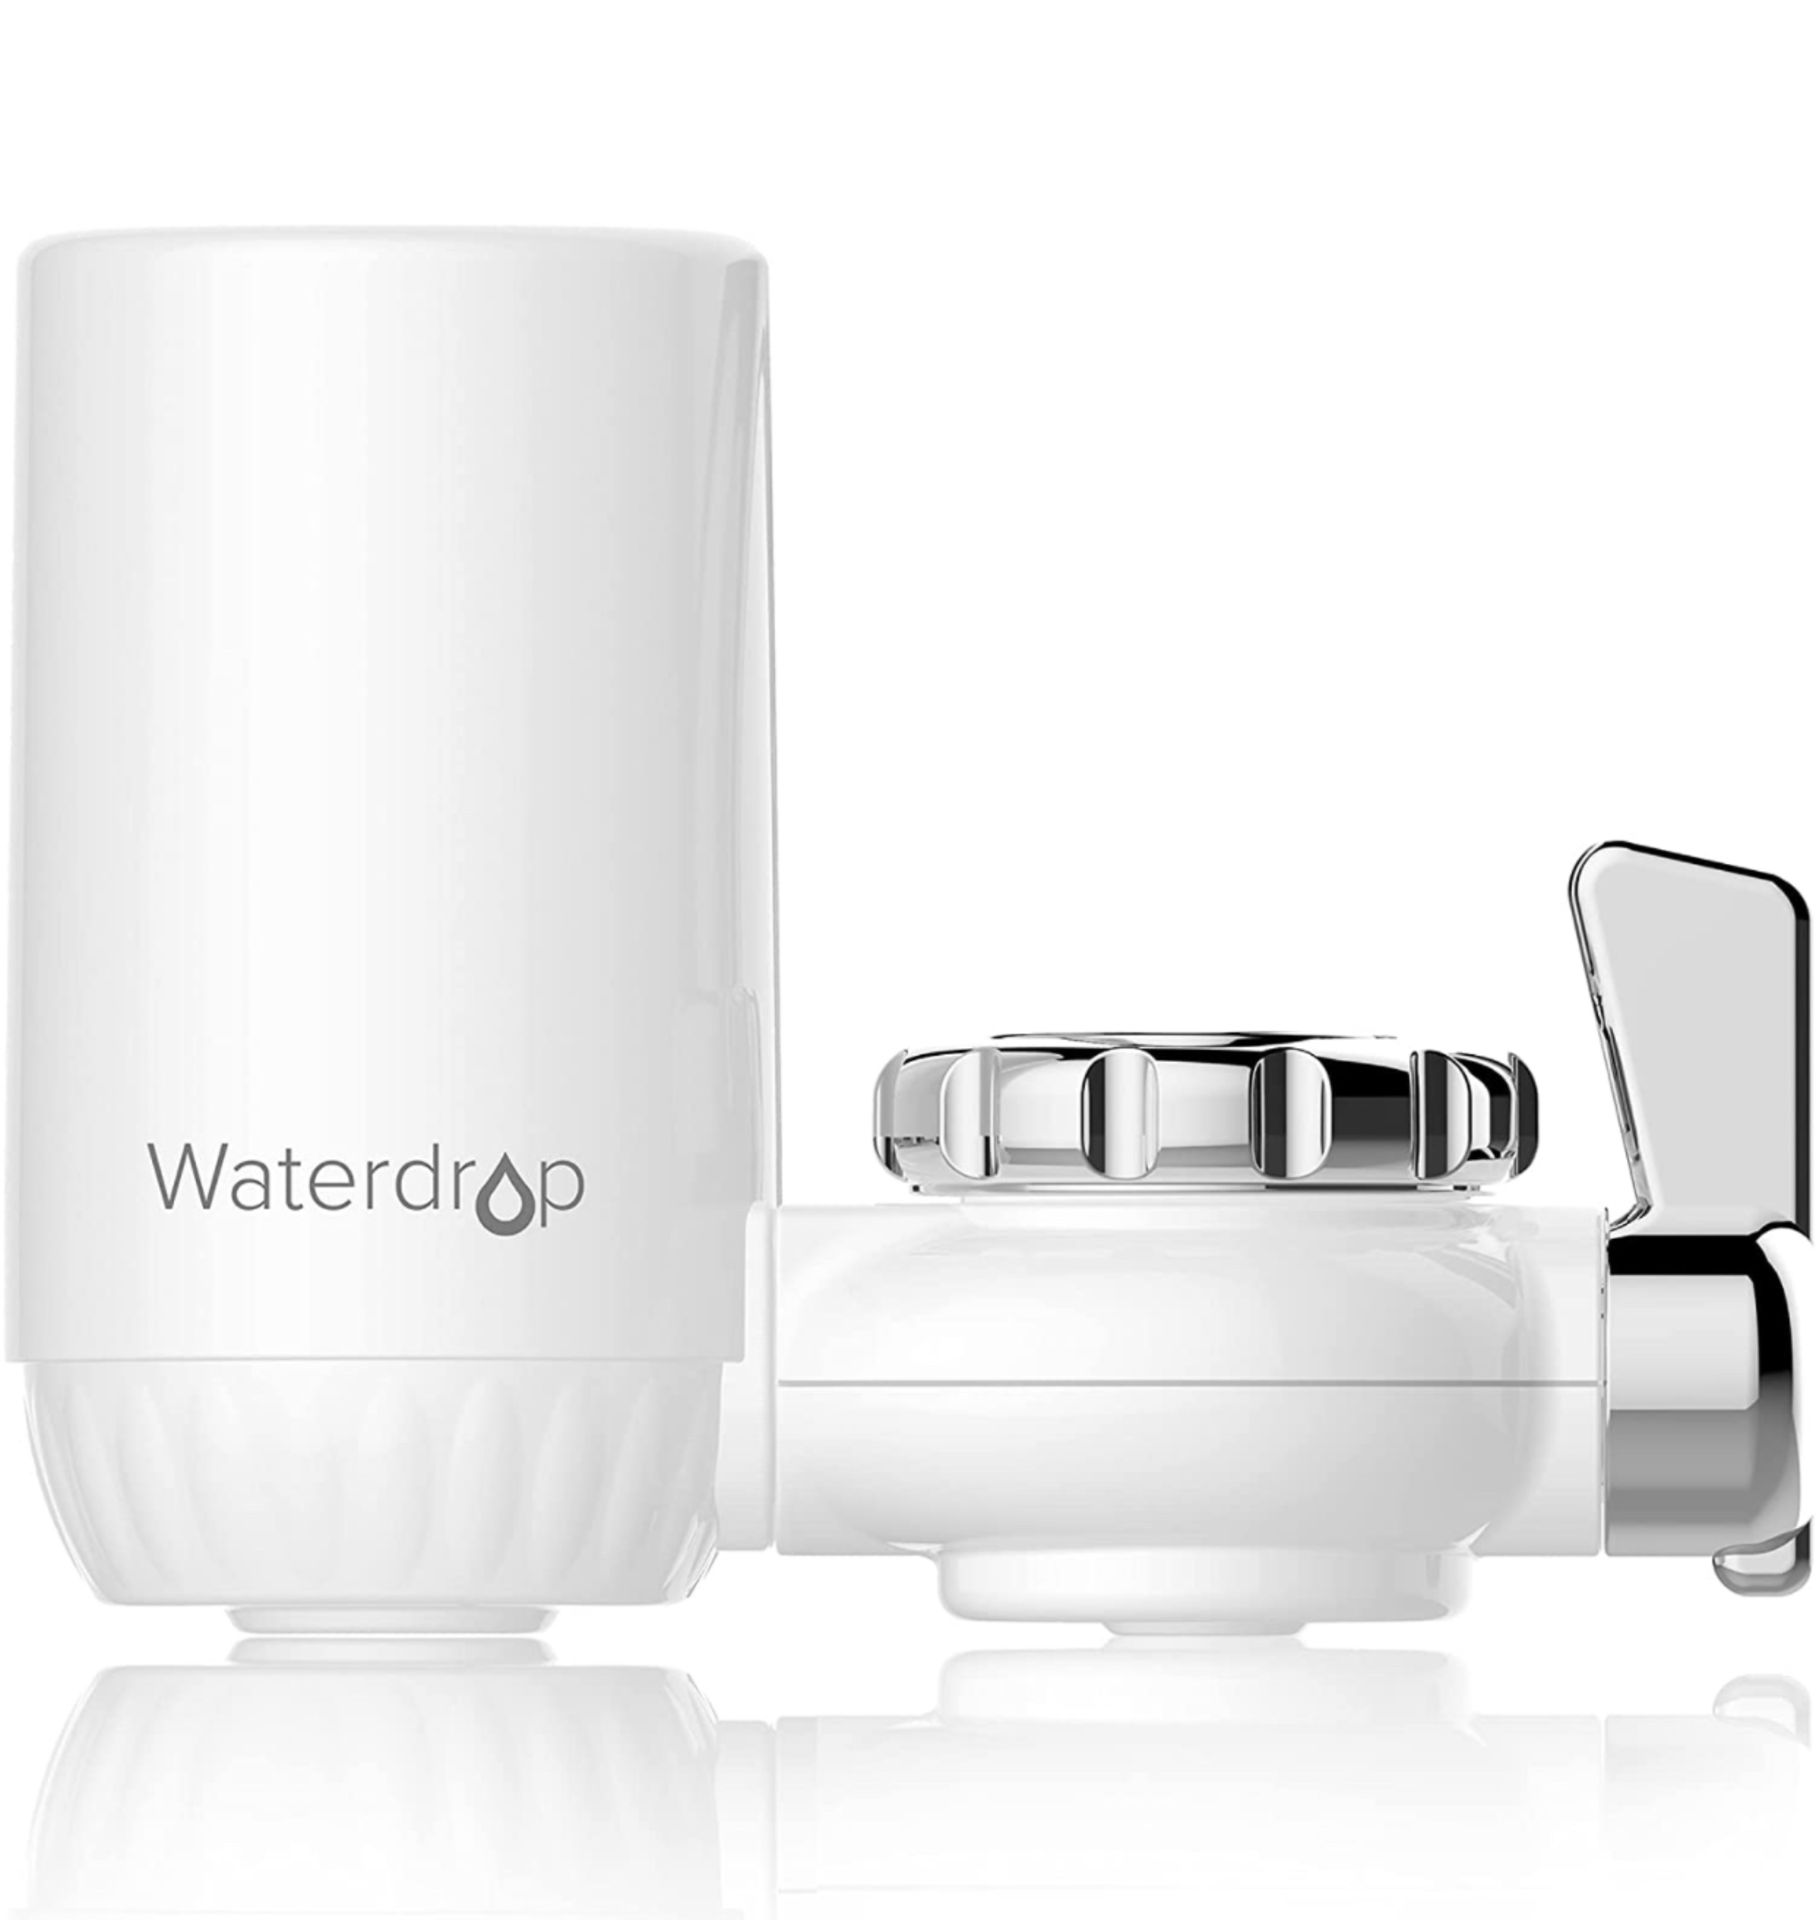 Waterdrop WD-FC-04 Activated Carbon Fiber Faucet Filtration System RRP £22.99